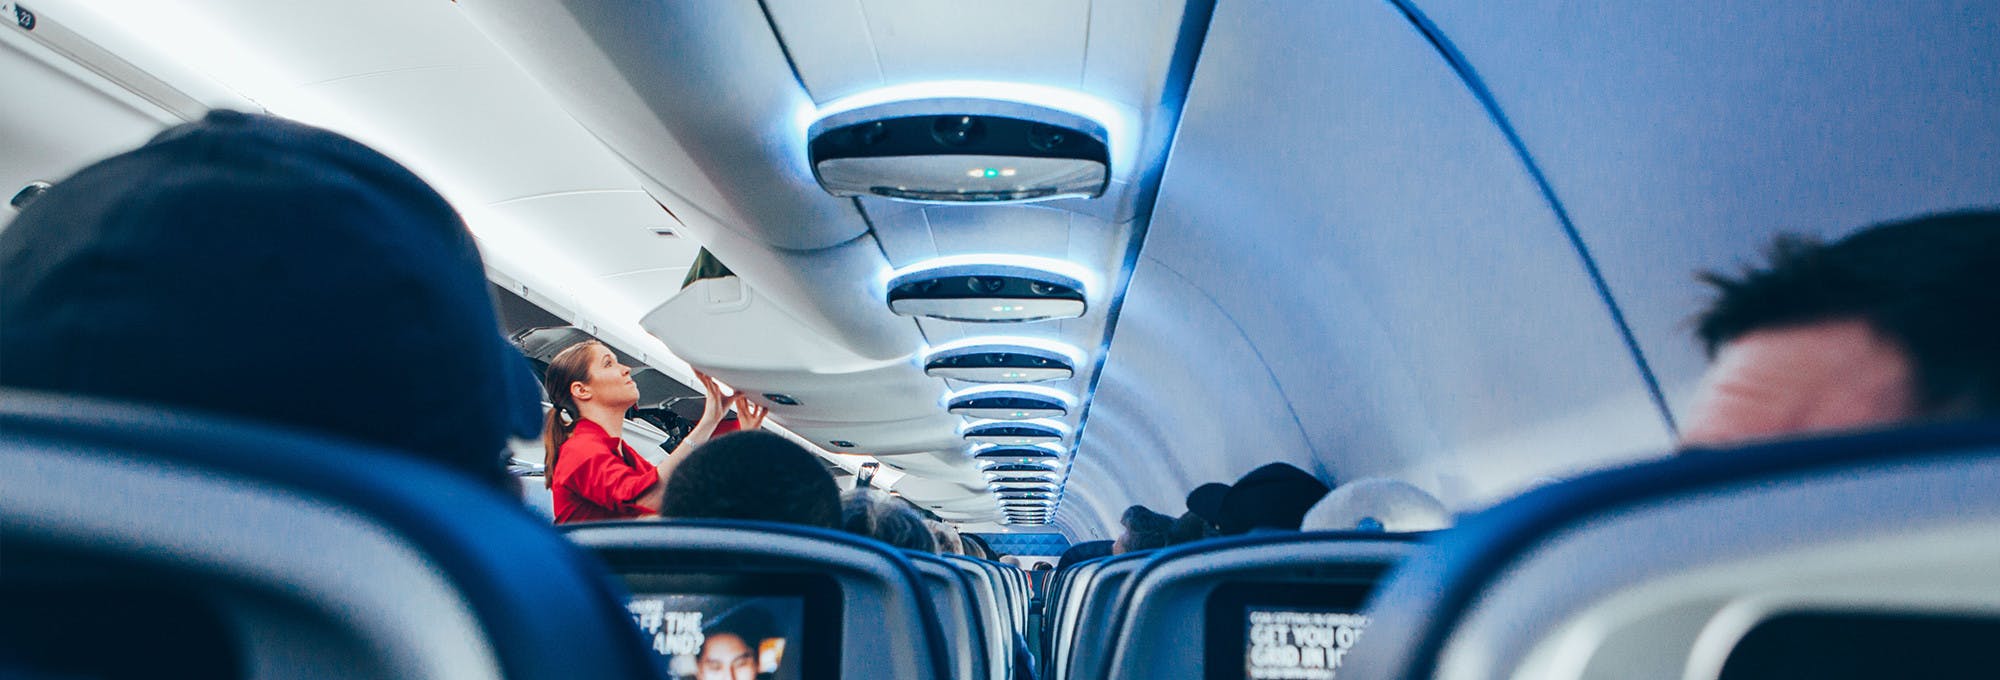 Inside an airplane from a passenger seat viewpoint